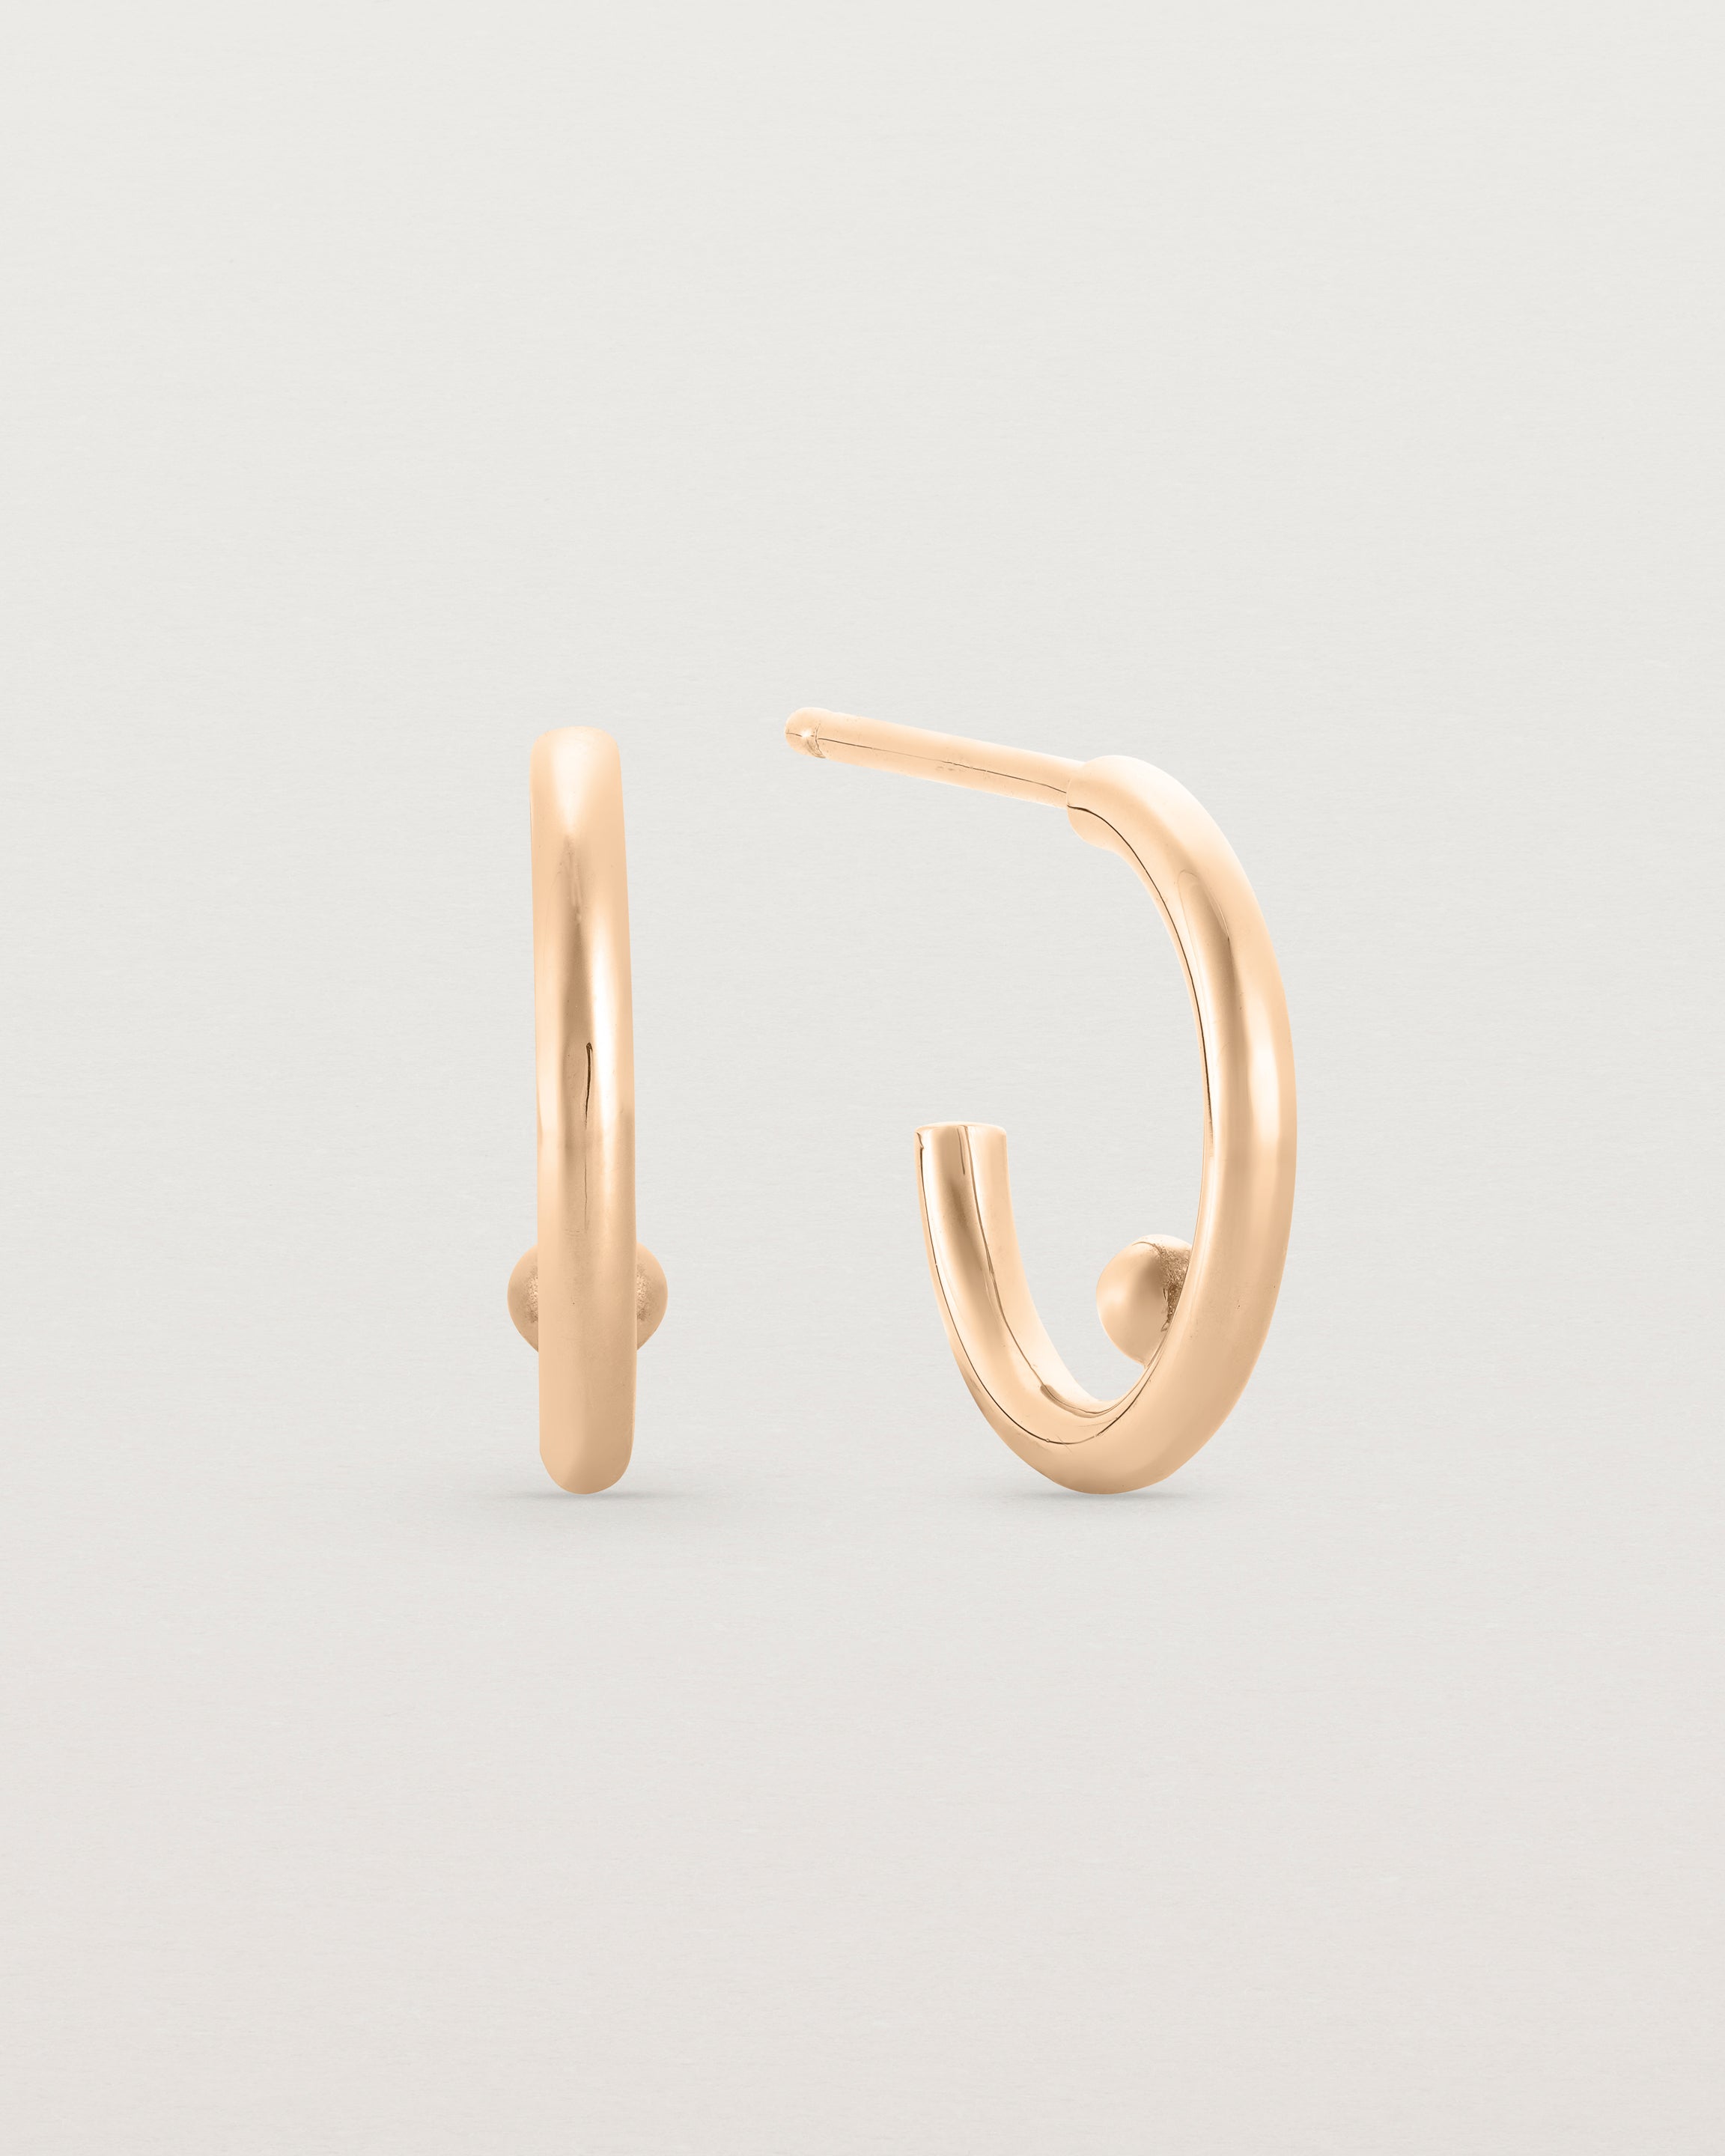 A small pair of rose gold open hoops with a gold ball in the centre